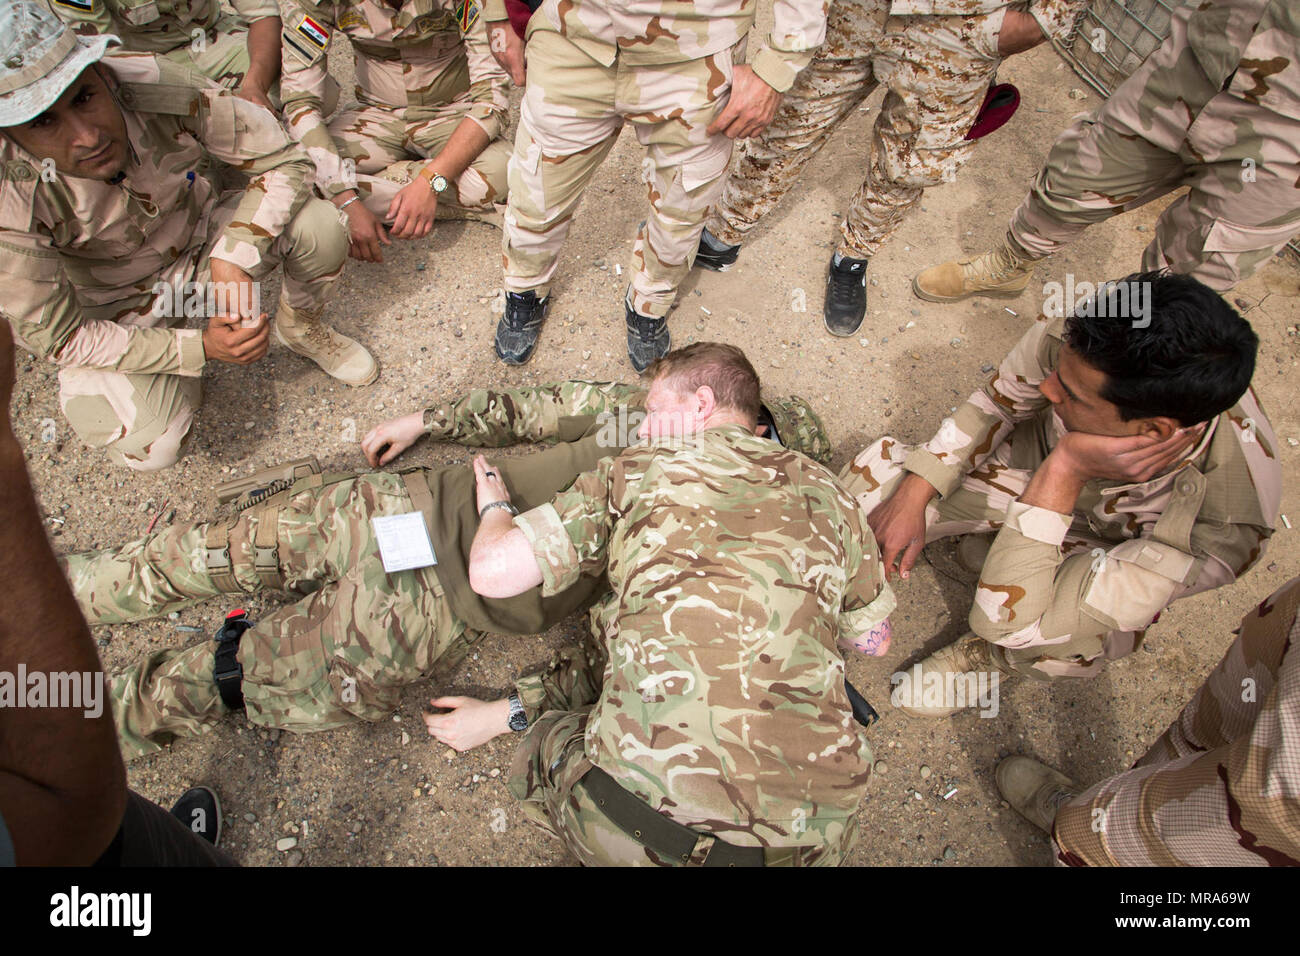 A British army medic deployed in support of Combined Joint Task Force – Operation Inherent Resolve and assigned to 2nd Battalion, Duke of Lancaster Regiment, shows how to check for breathing  on a simulated casualty during tactical field care training at Camp Taji, Iraq, April 12, 2017. This training is part of the overall Combined Joint Task Force – Operation Inherent Resolve building partner capacity mission by training and improving the capability of partnered forces fighting ISIS. CJTF-OIR is the global Coalition to defeat ISIS in Iraq and Syria. Stock Photo